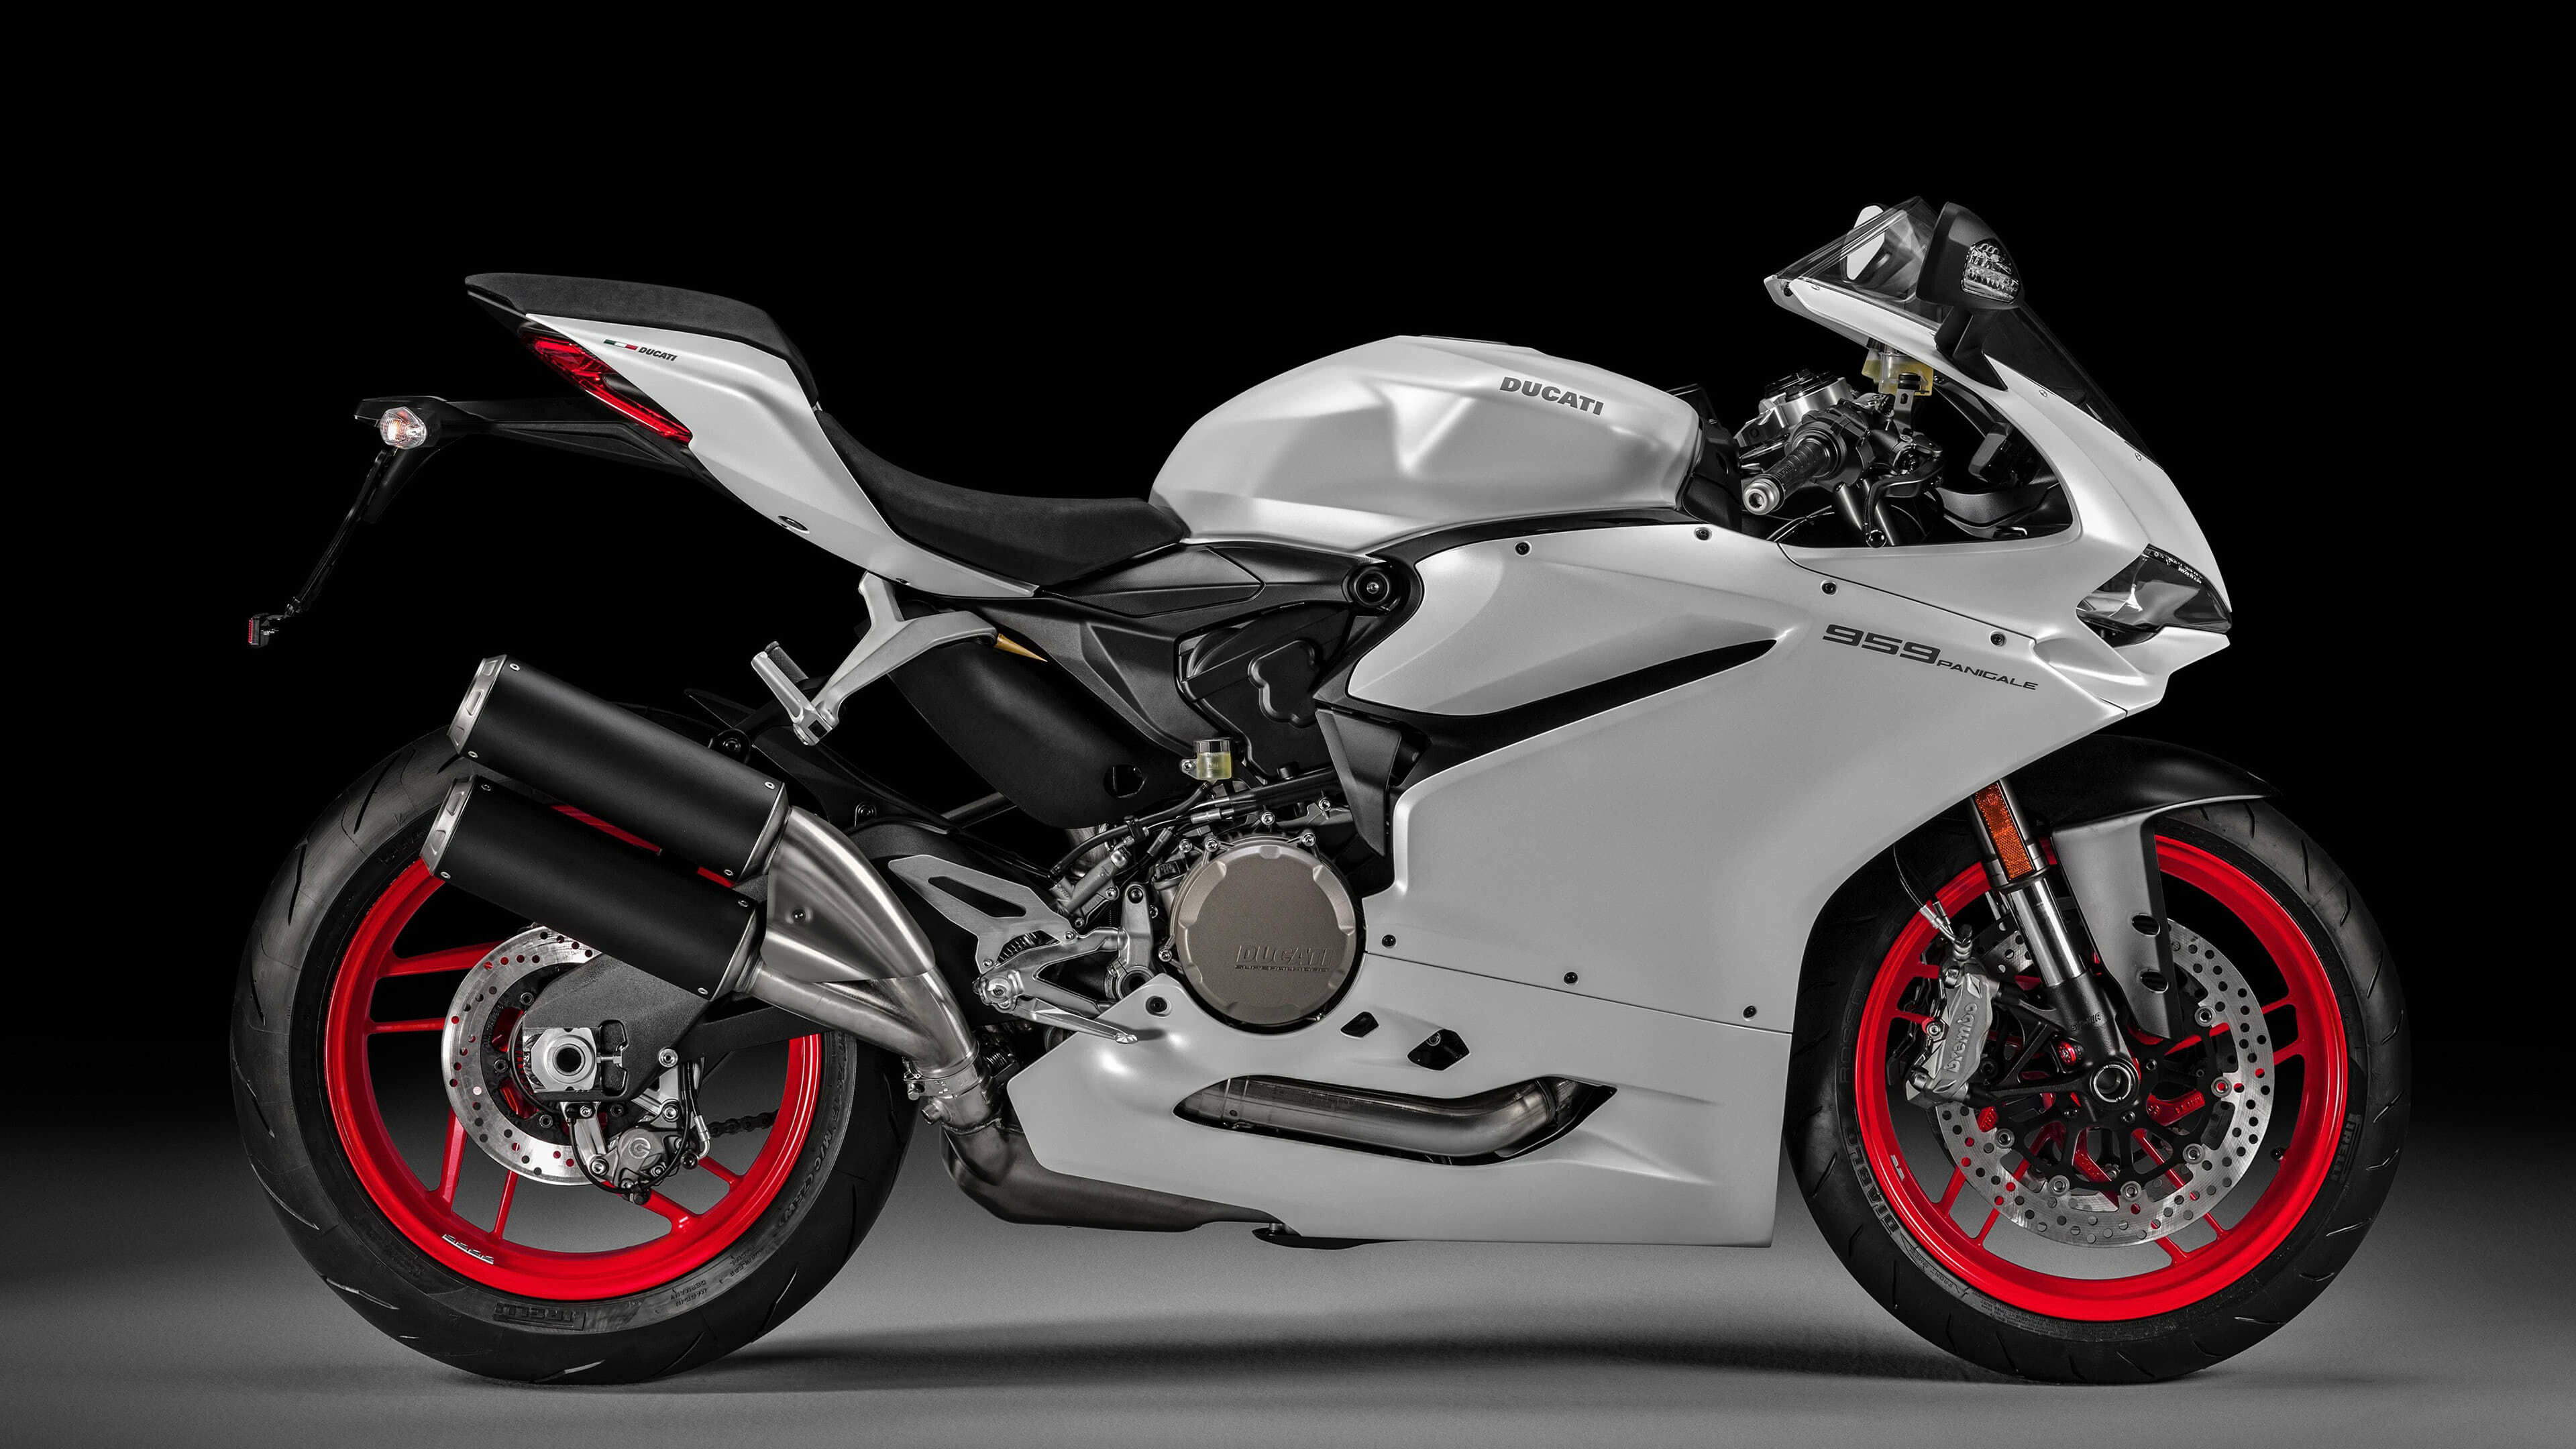 Ducati: 959 Panigale, The company founded in Bologna in 1926. 3840x2160 4K Wallpaper.